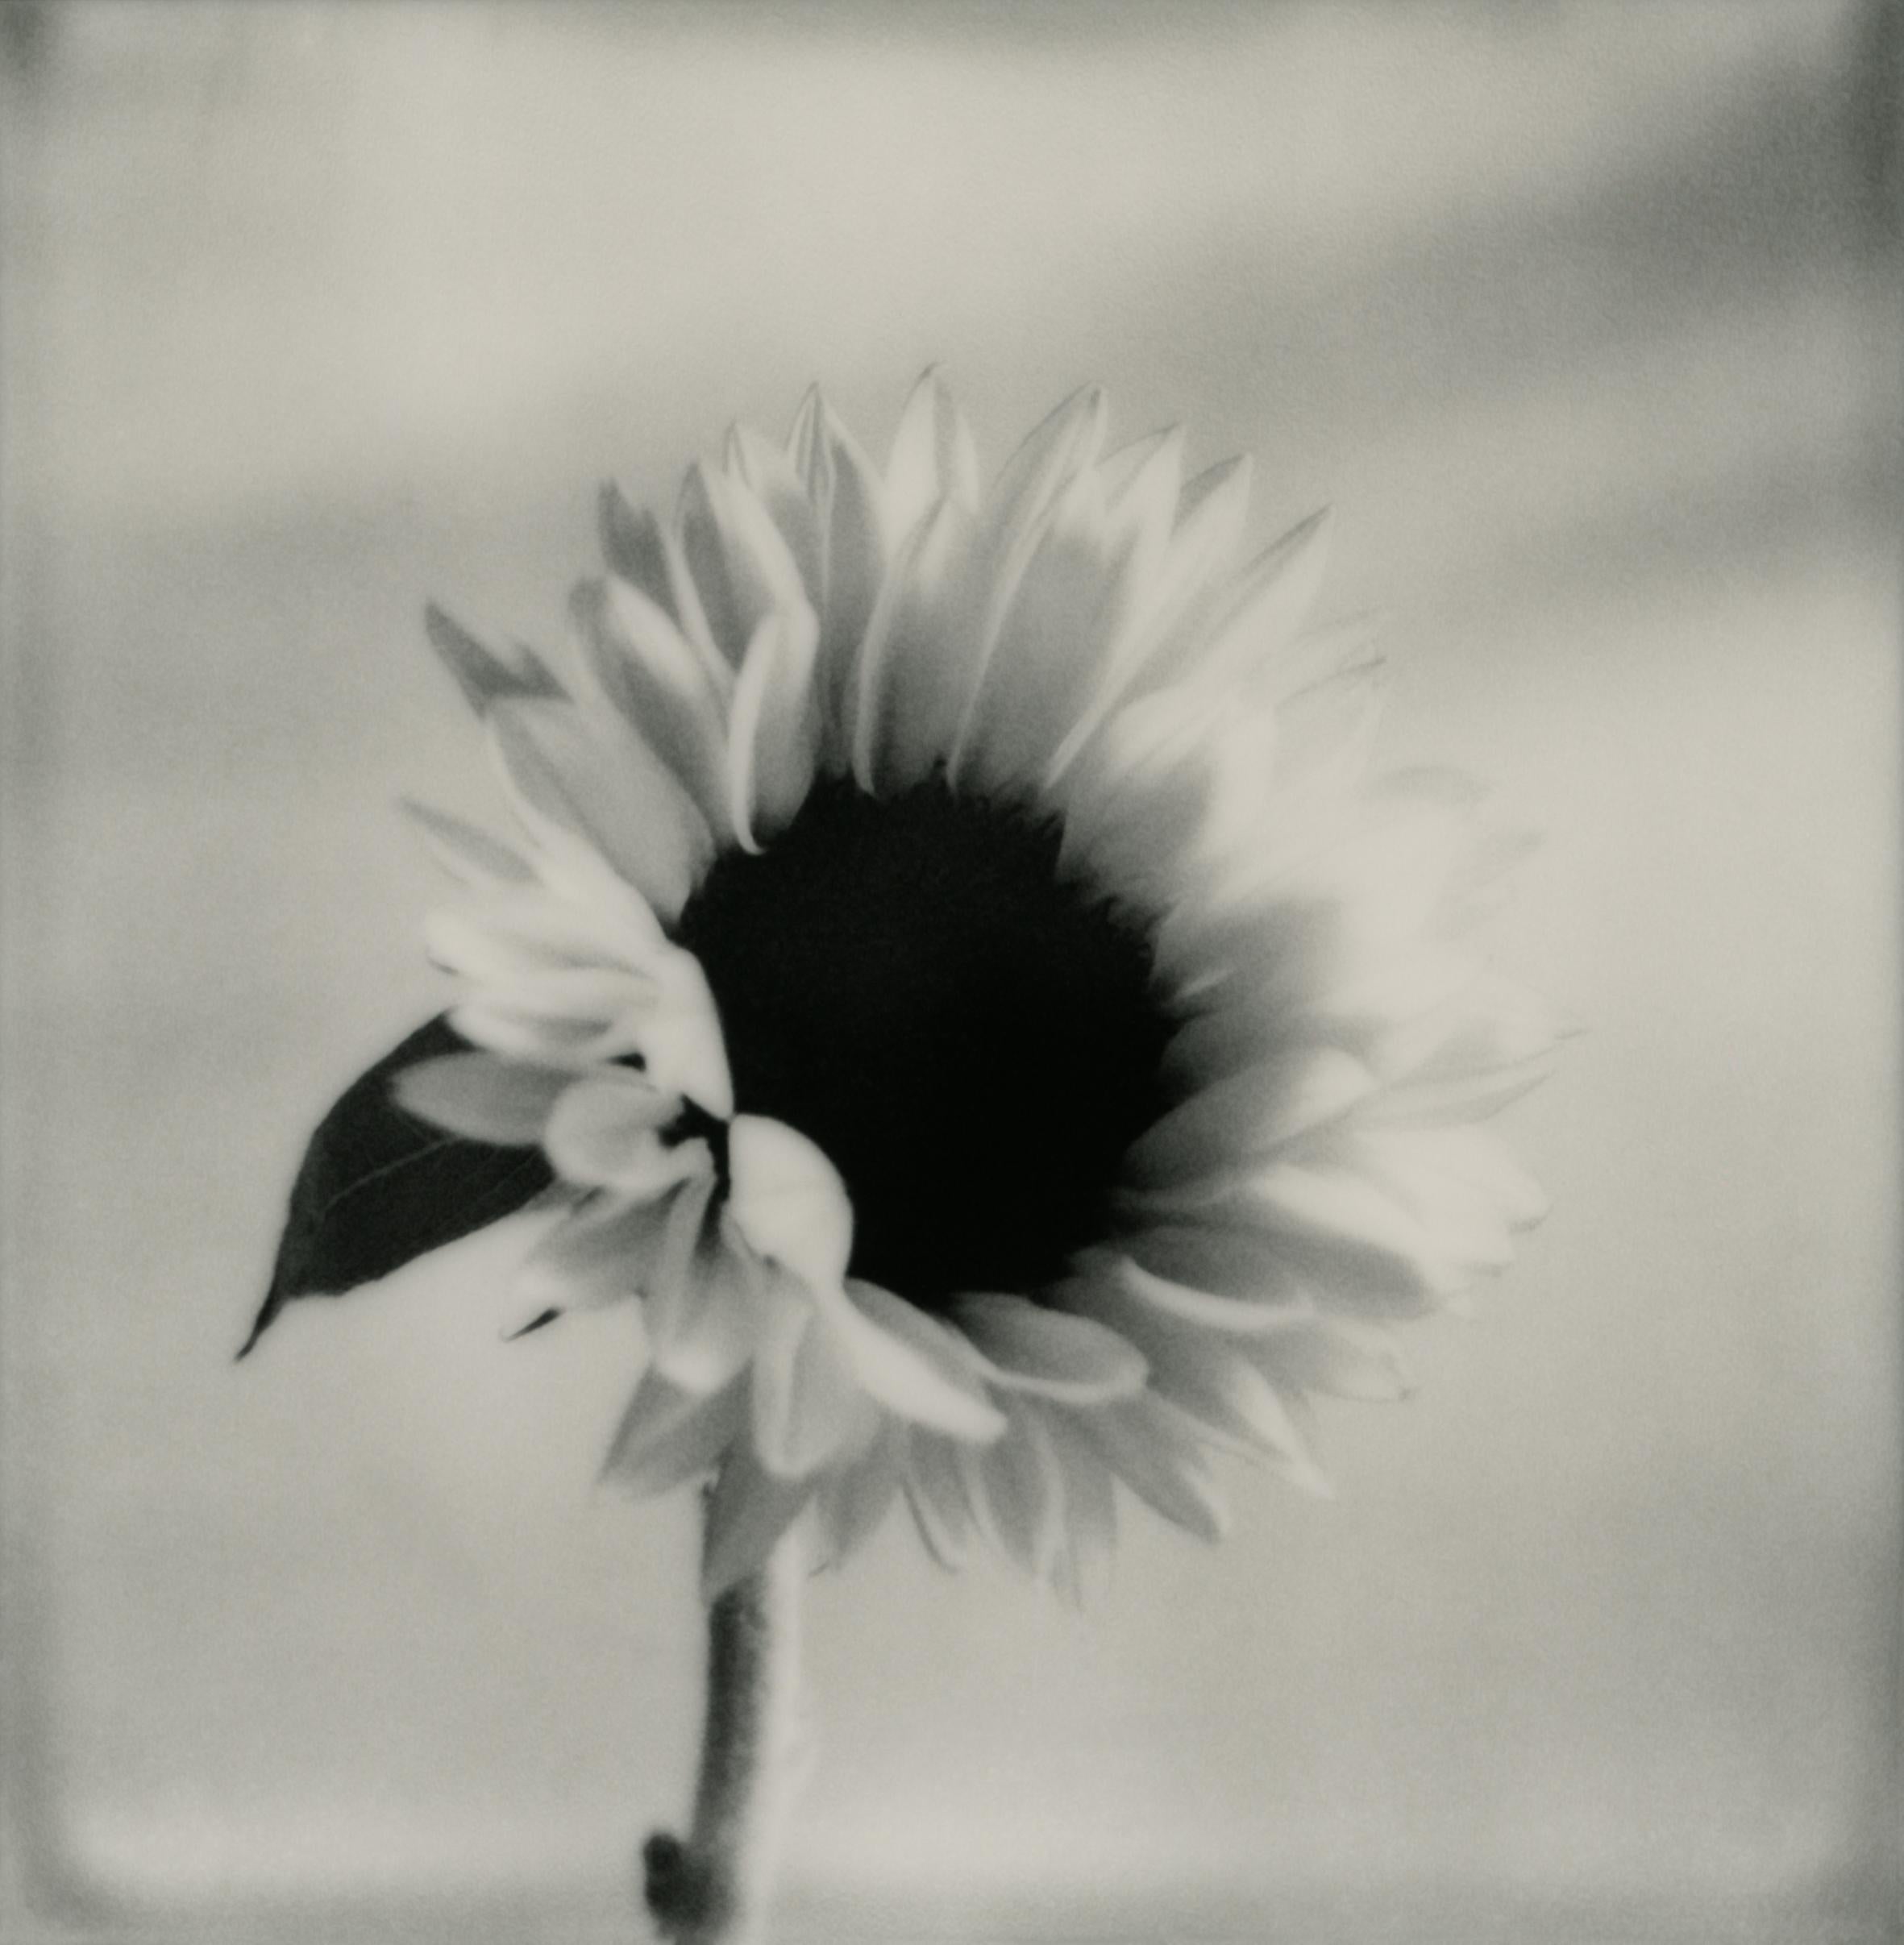 Ugne Pouwell Black and White Photograph - Sunflower No.2 - Polaroid black and white floral photography, Limited edition 20